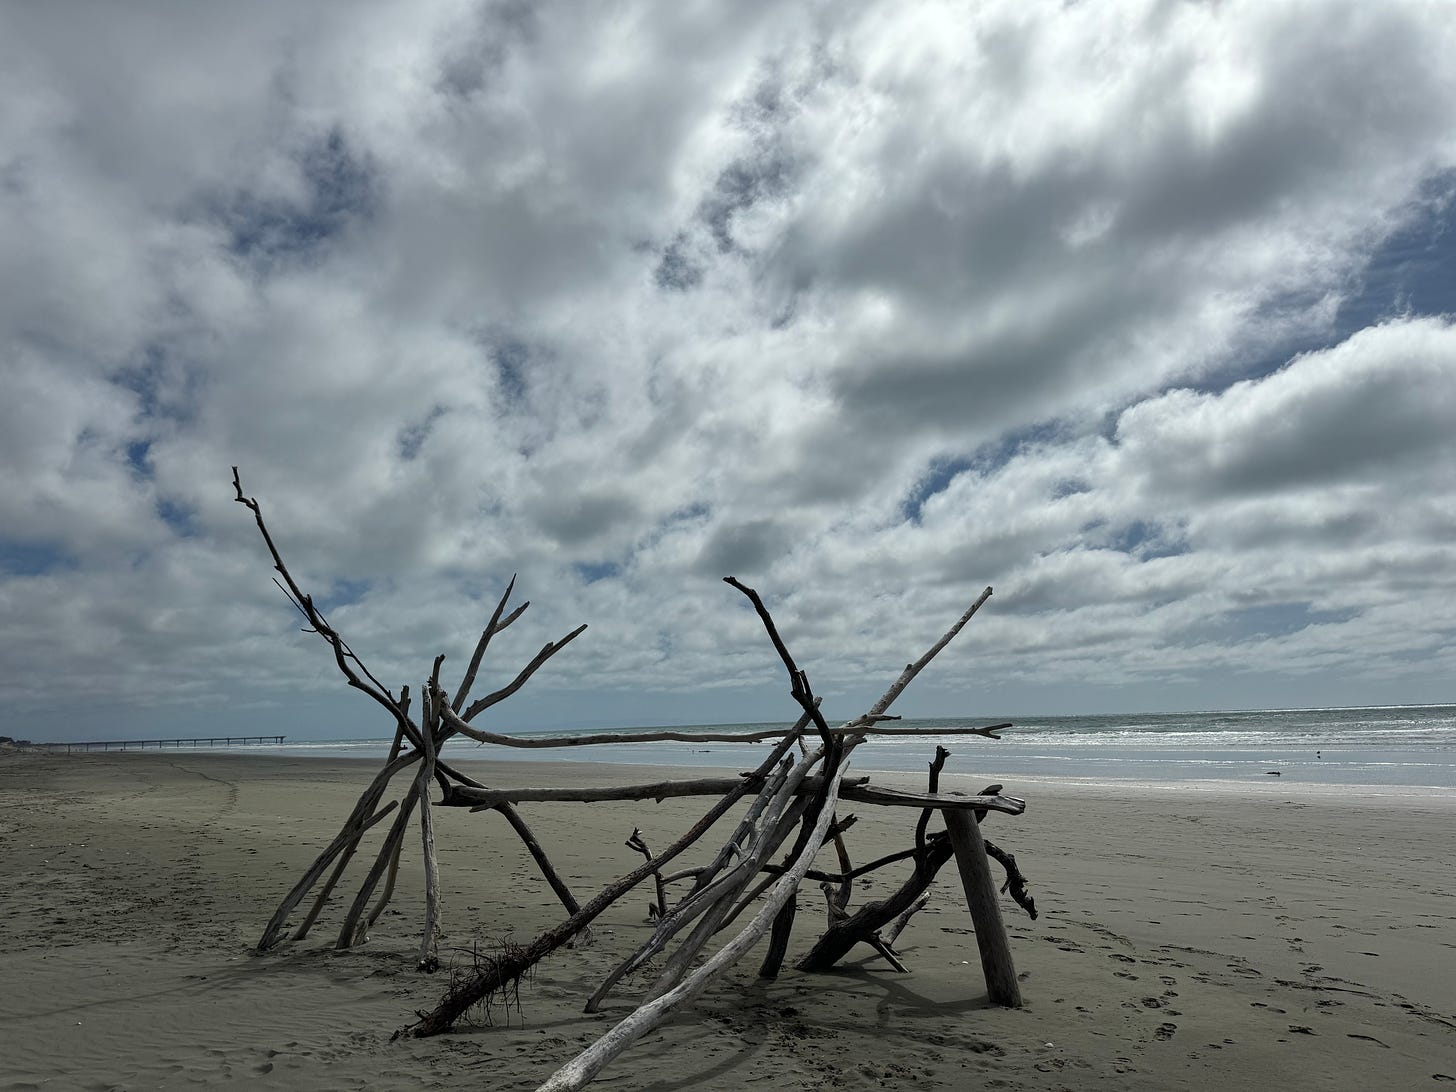 Driftwood on a beach in New Zealand